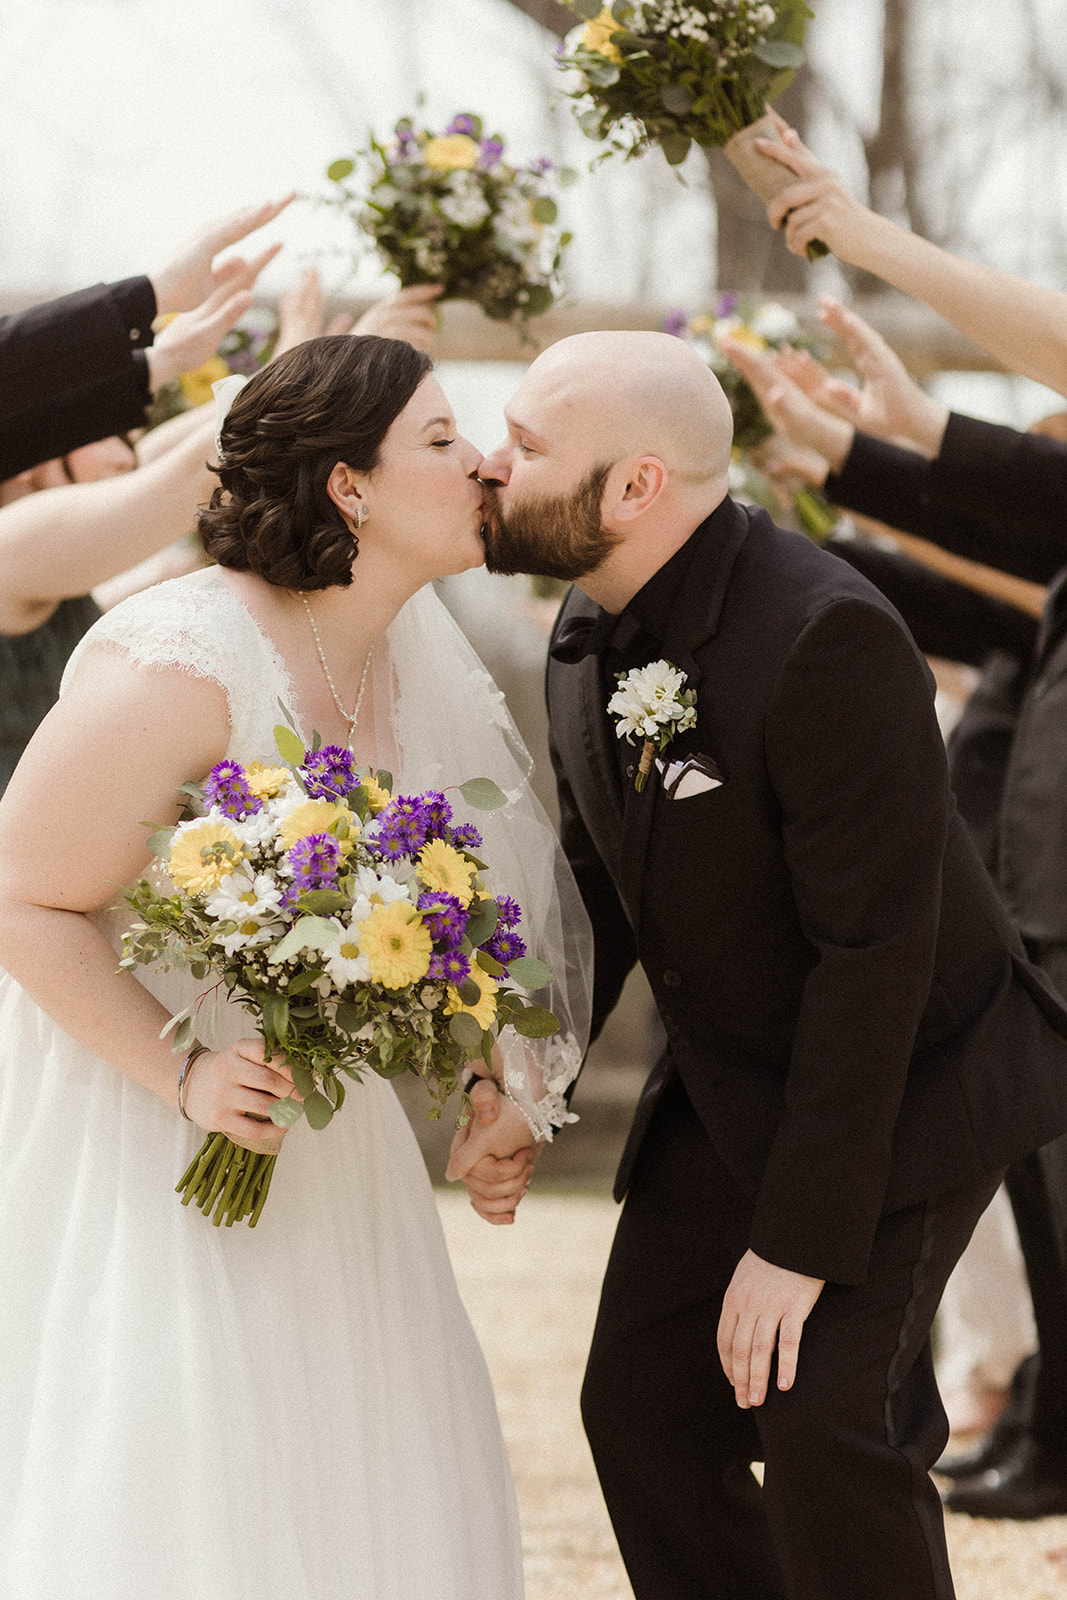 Stunning bride and groom exit their dreamy upstate New York wedding